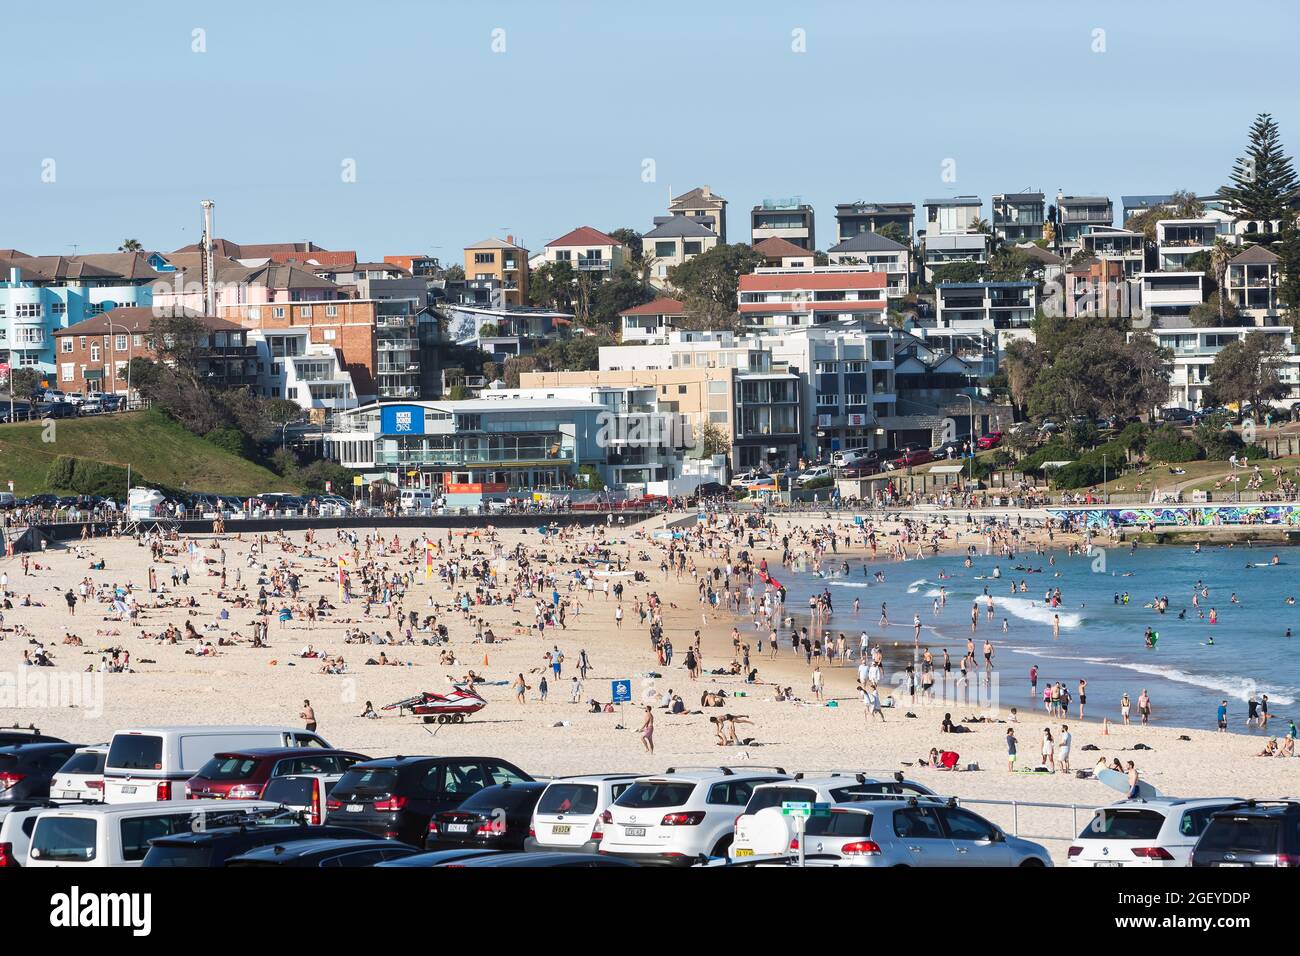 Sydney, Australia. Sunday 22nd August 2021. General views of people relaxing on Bondi Beach as winter temperatures reach 25 degrees centigrade. The Sydney Lockdown has been extended across greater Sydney until September 30th as COVID-19 Delta Strain case numbers continue to rise. Face masks are now compulsory outdoors across NSW unless exercising. Credit: Paul Lovelace/Alamy Live News Stock Photo